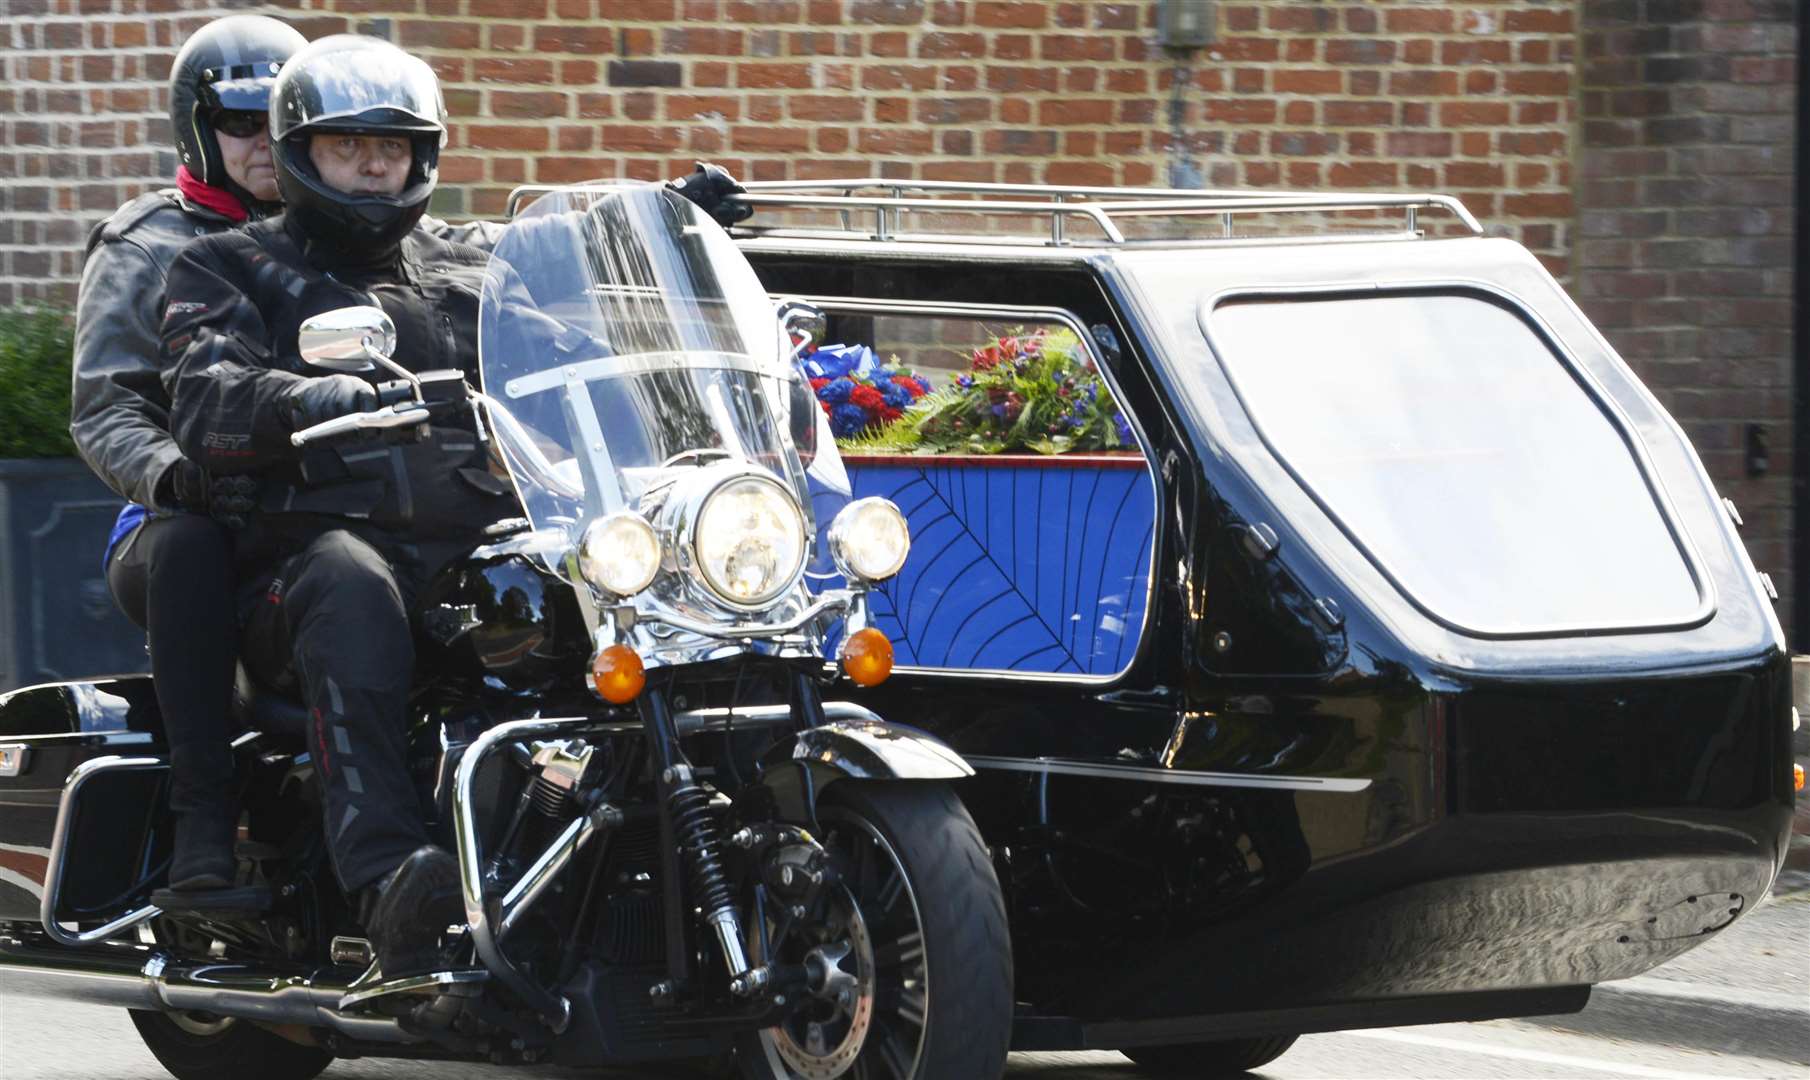 Sam's coffin, decorated in Spiderman colours, was carried in a sidecar